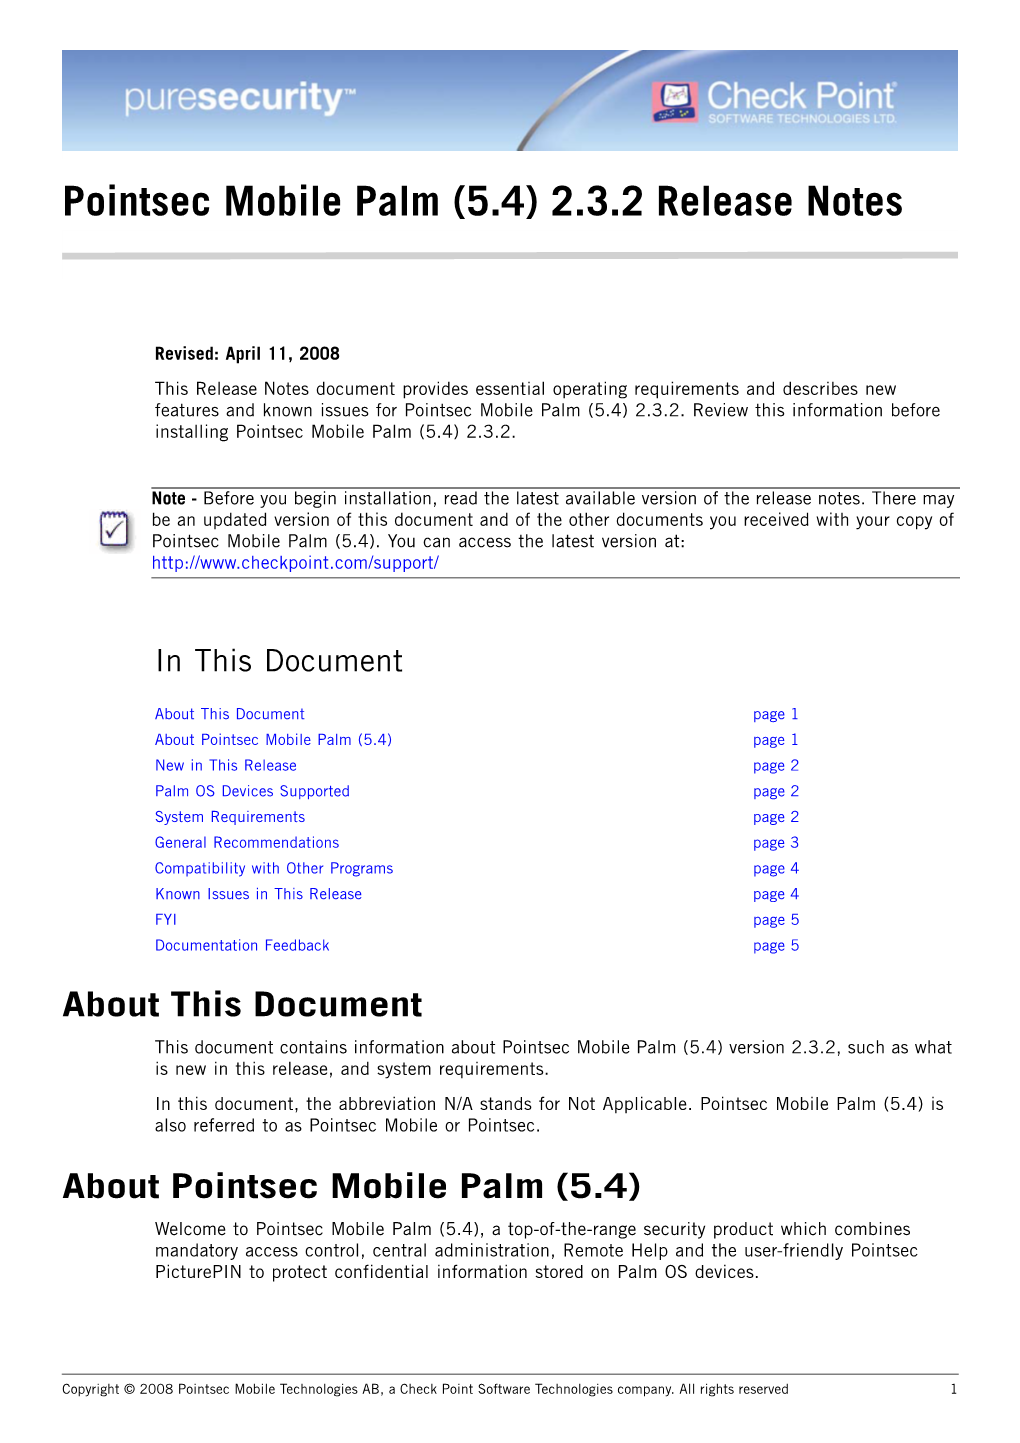 Pointsec Mobile Palm (5.4) 2.3.2 Release Notes